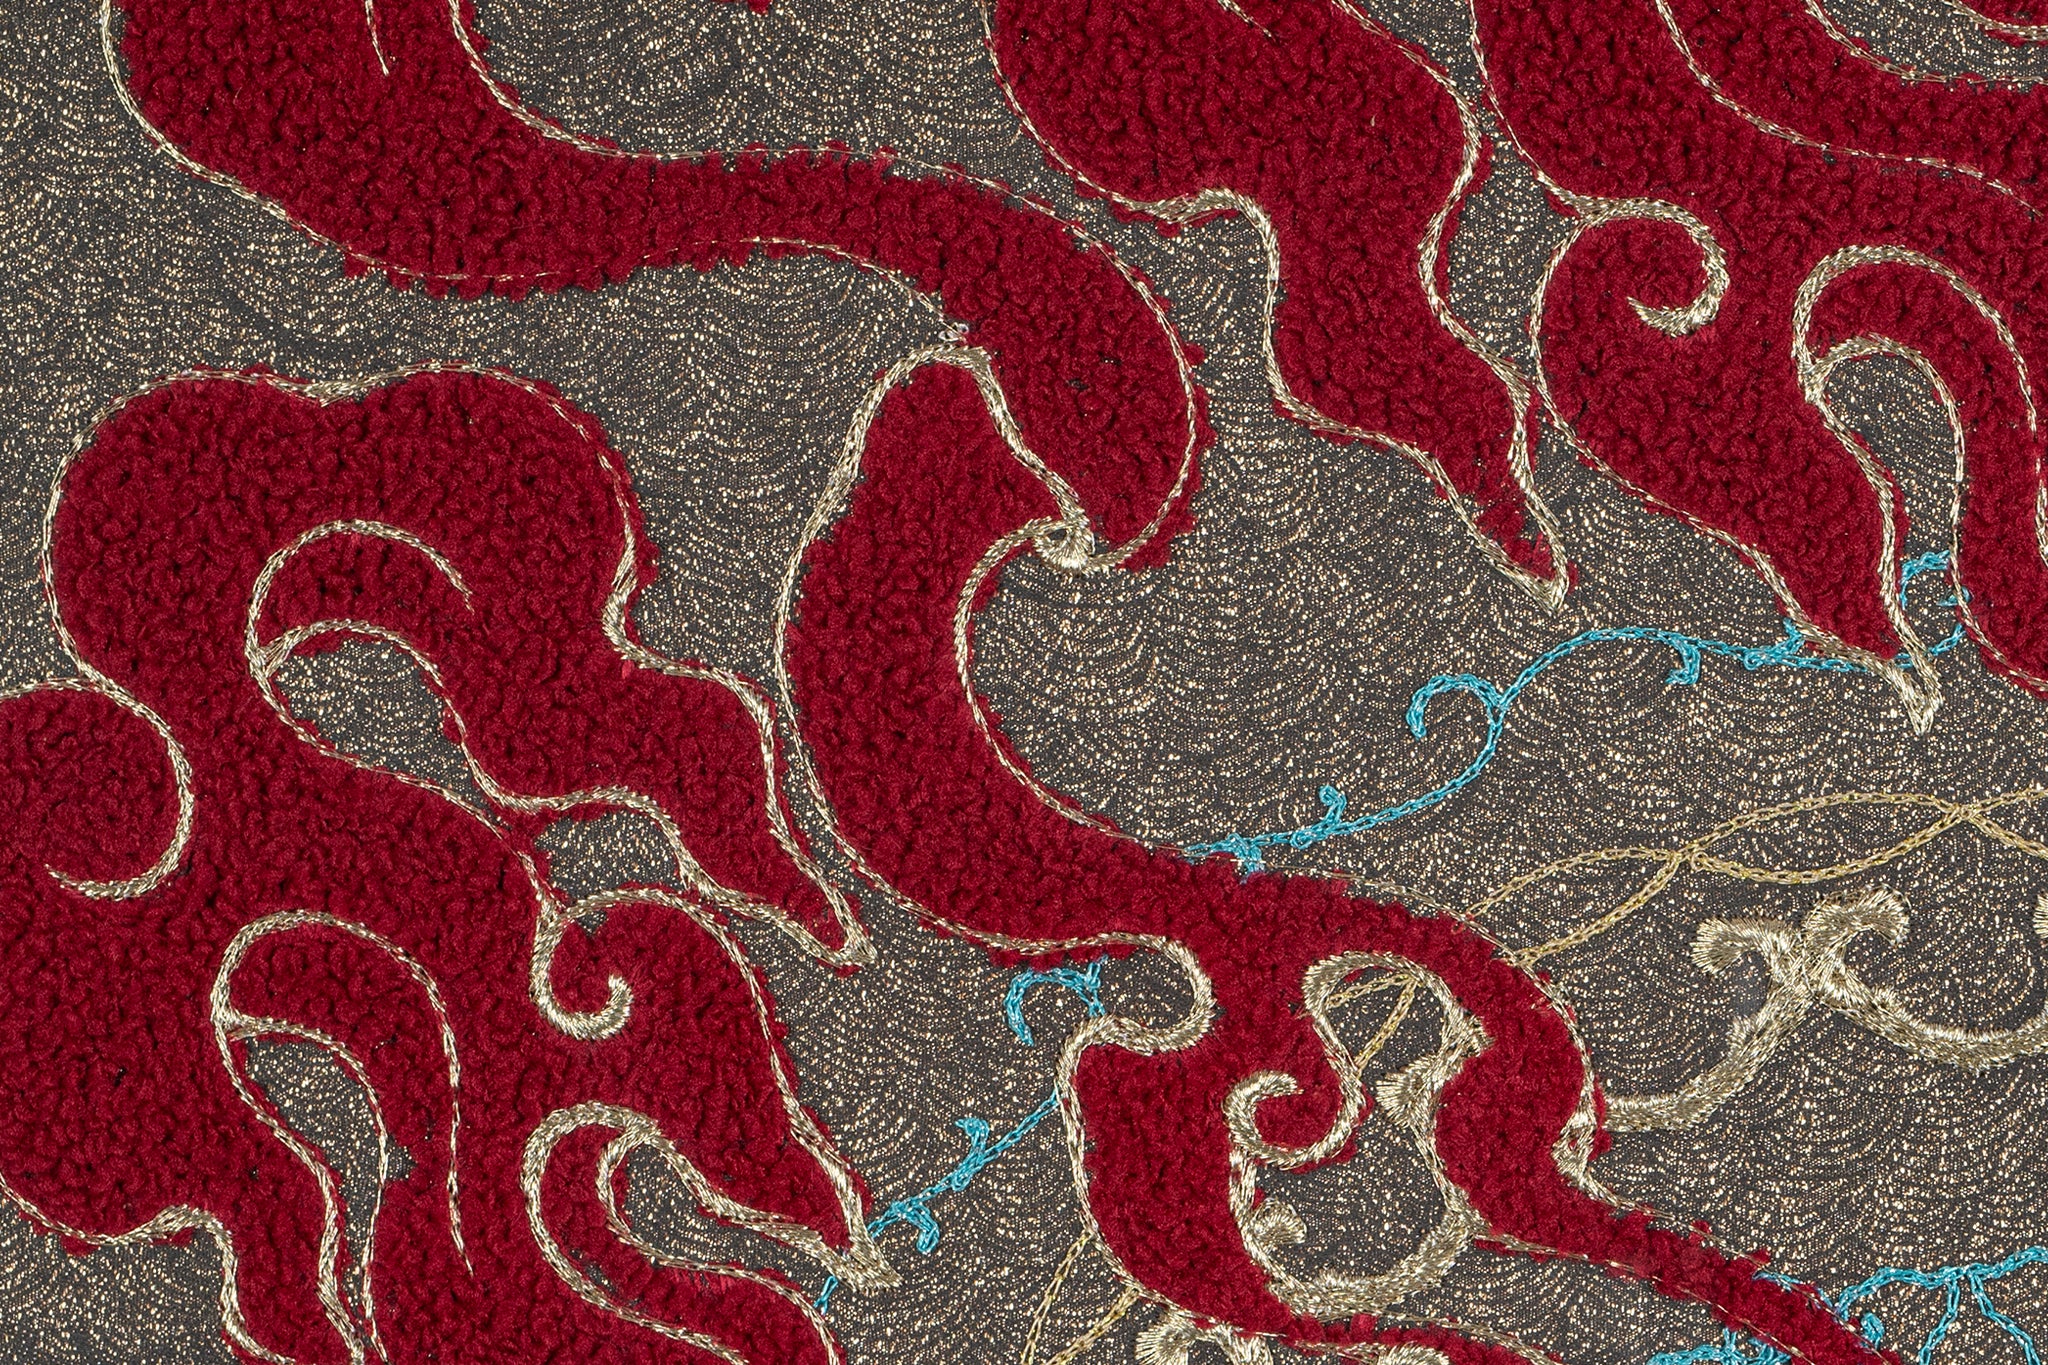 Detailed view of framed embroidery artwork featuring the ball design with fire and water elements.